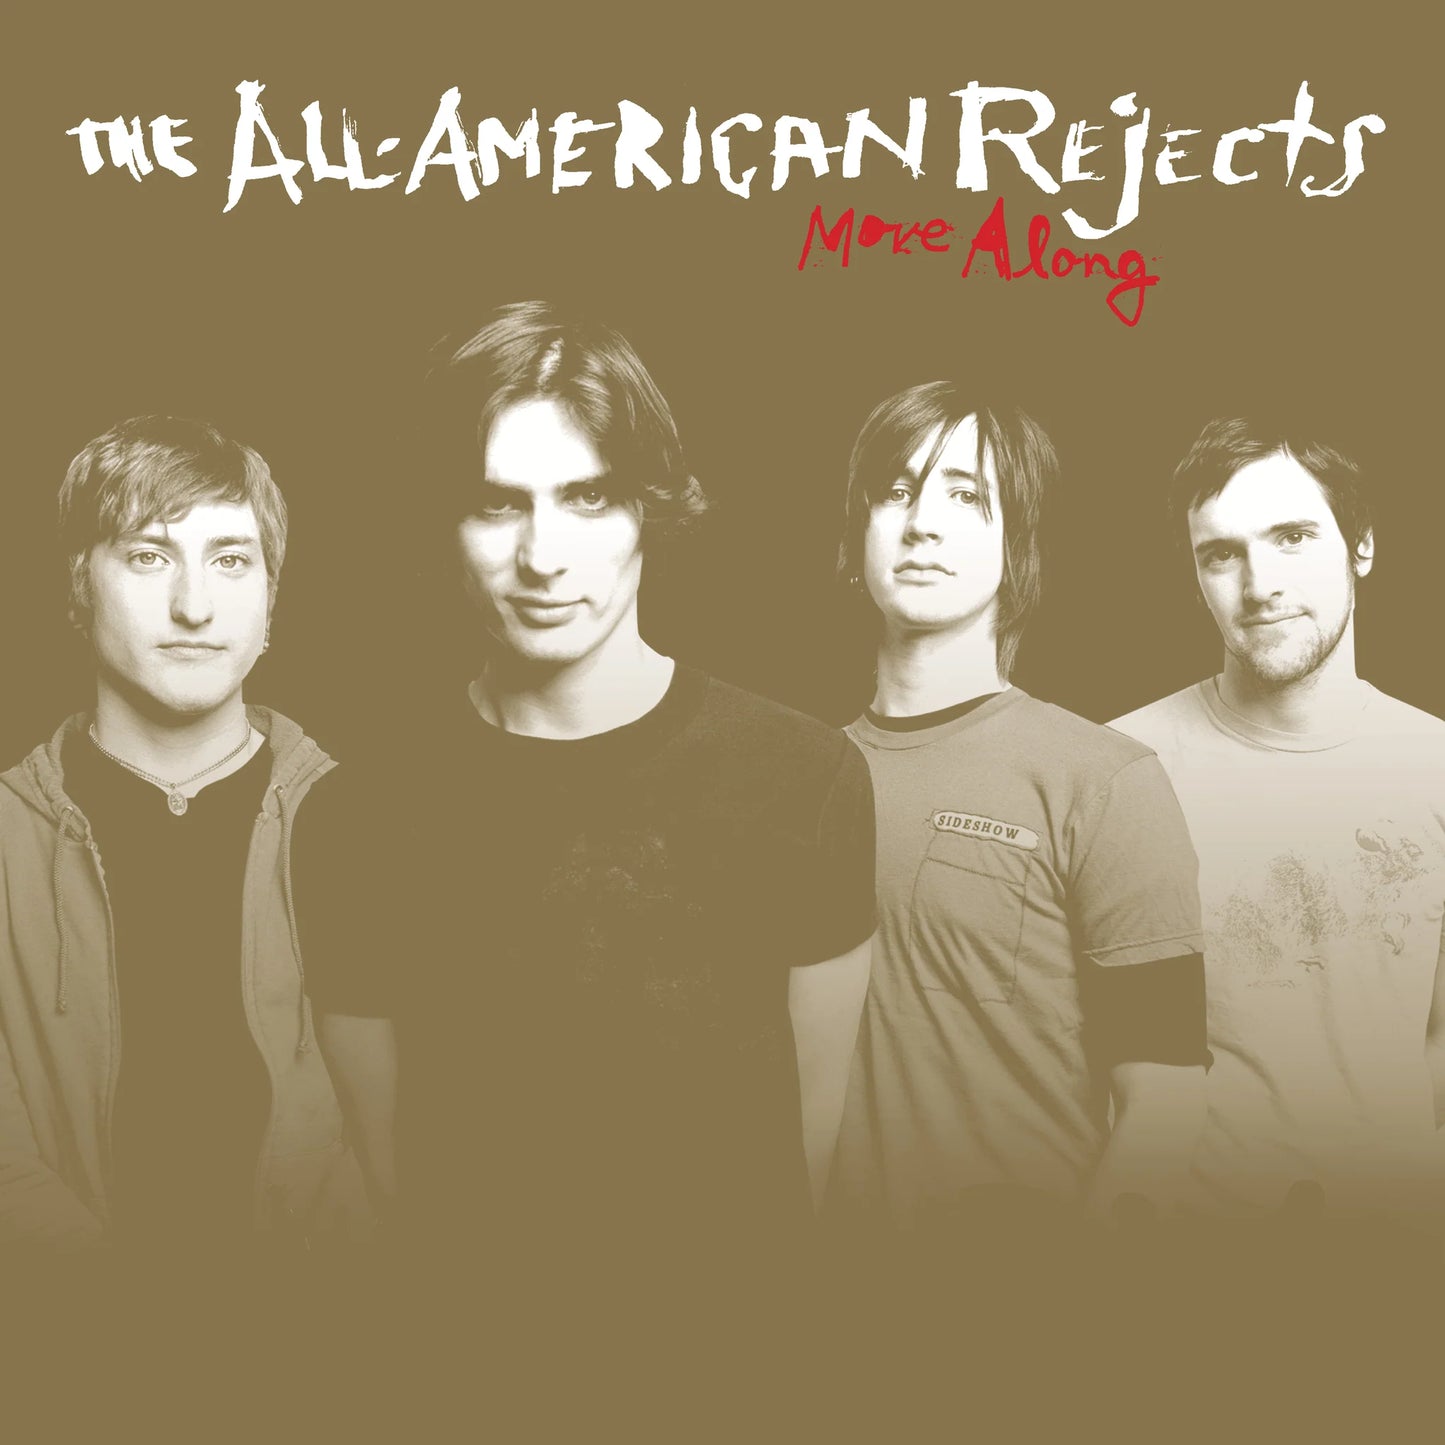 The All-American Rejects "Move Along" LP